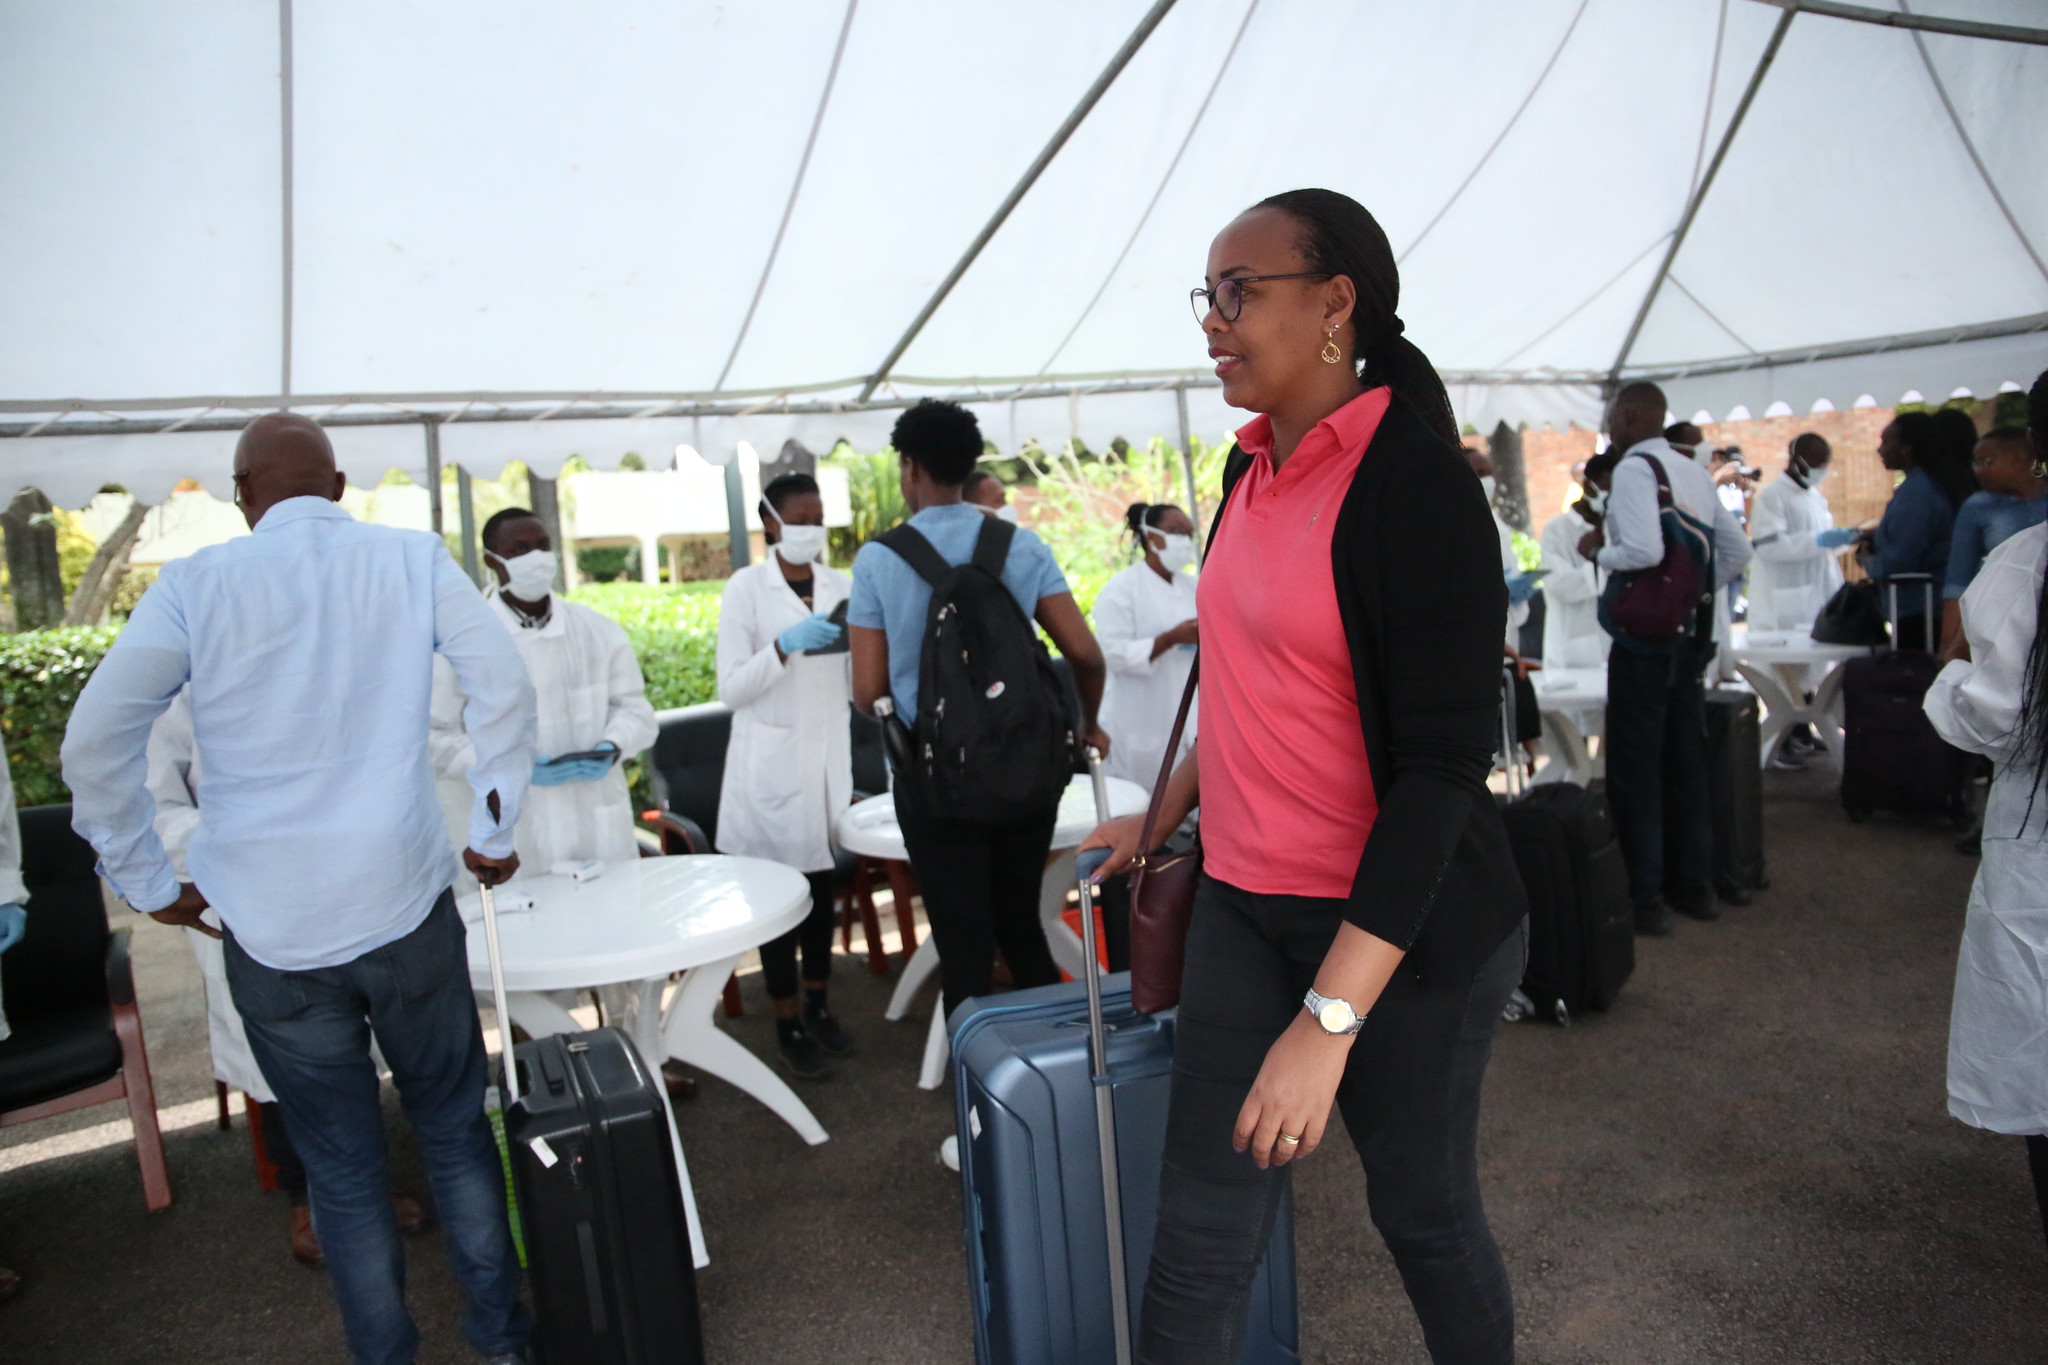 A team of doctors were on hand to screen officials traveling to the 17th National Leadership Retreat for the coronavirus.